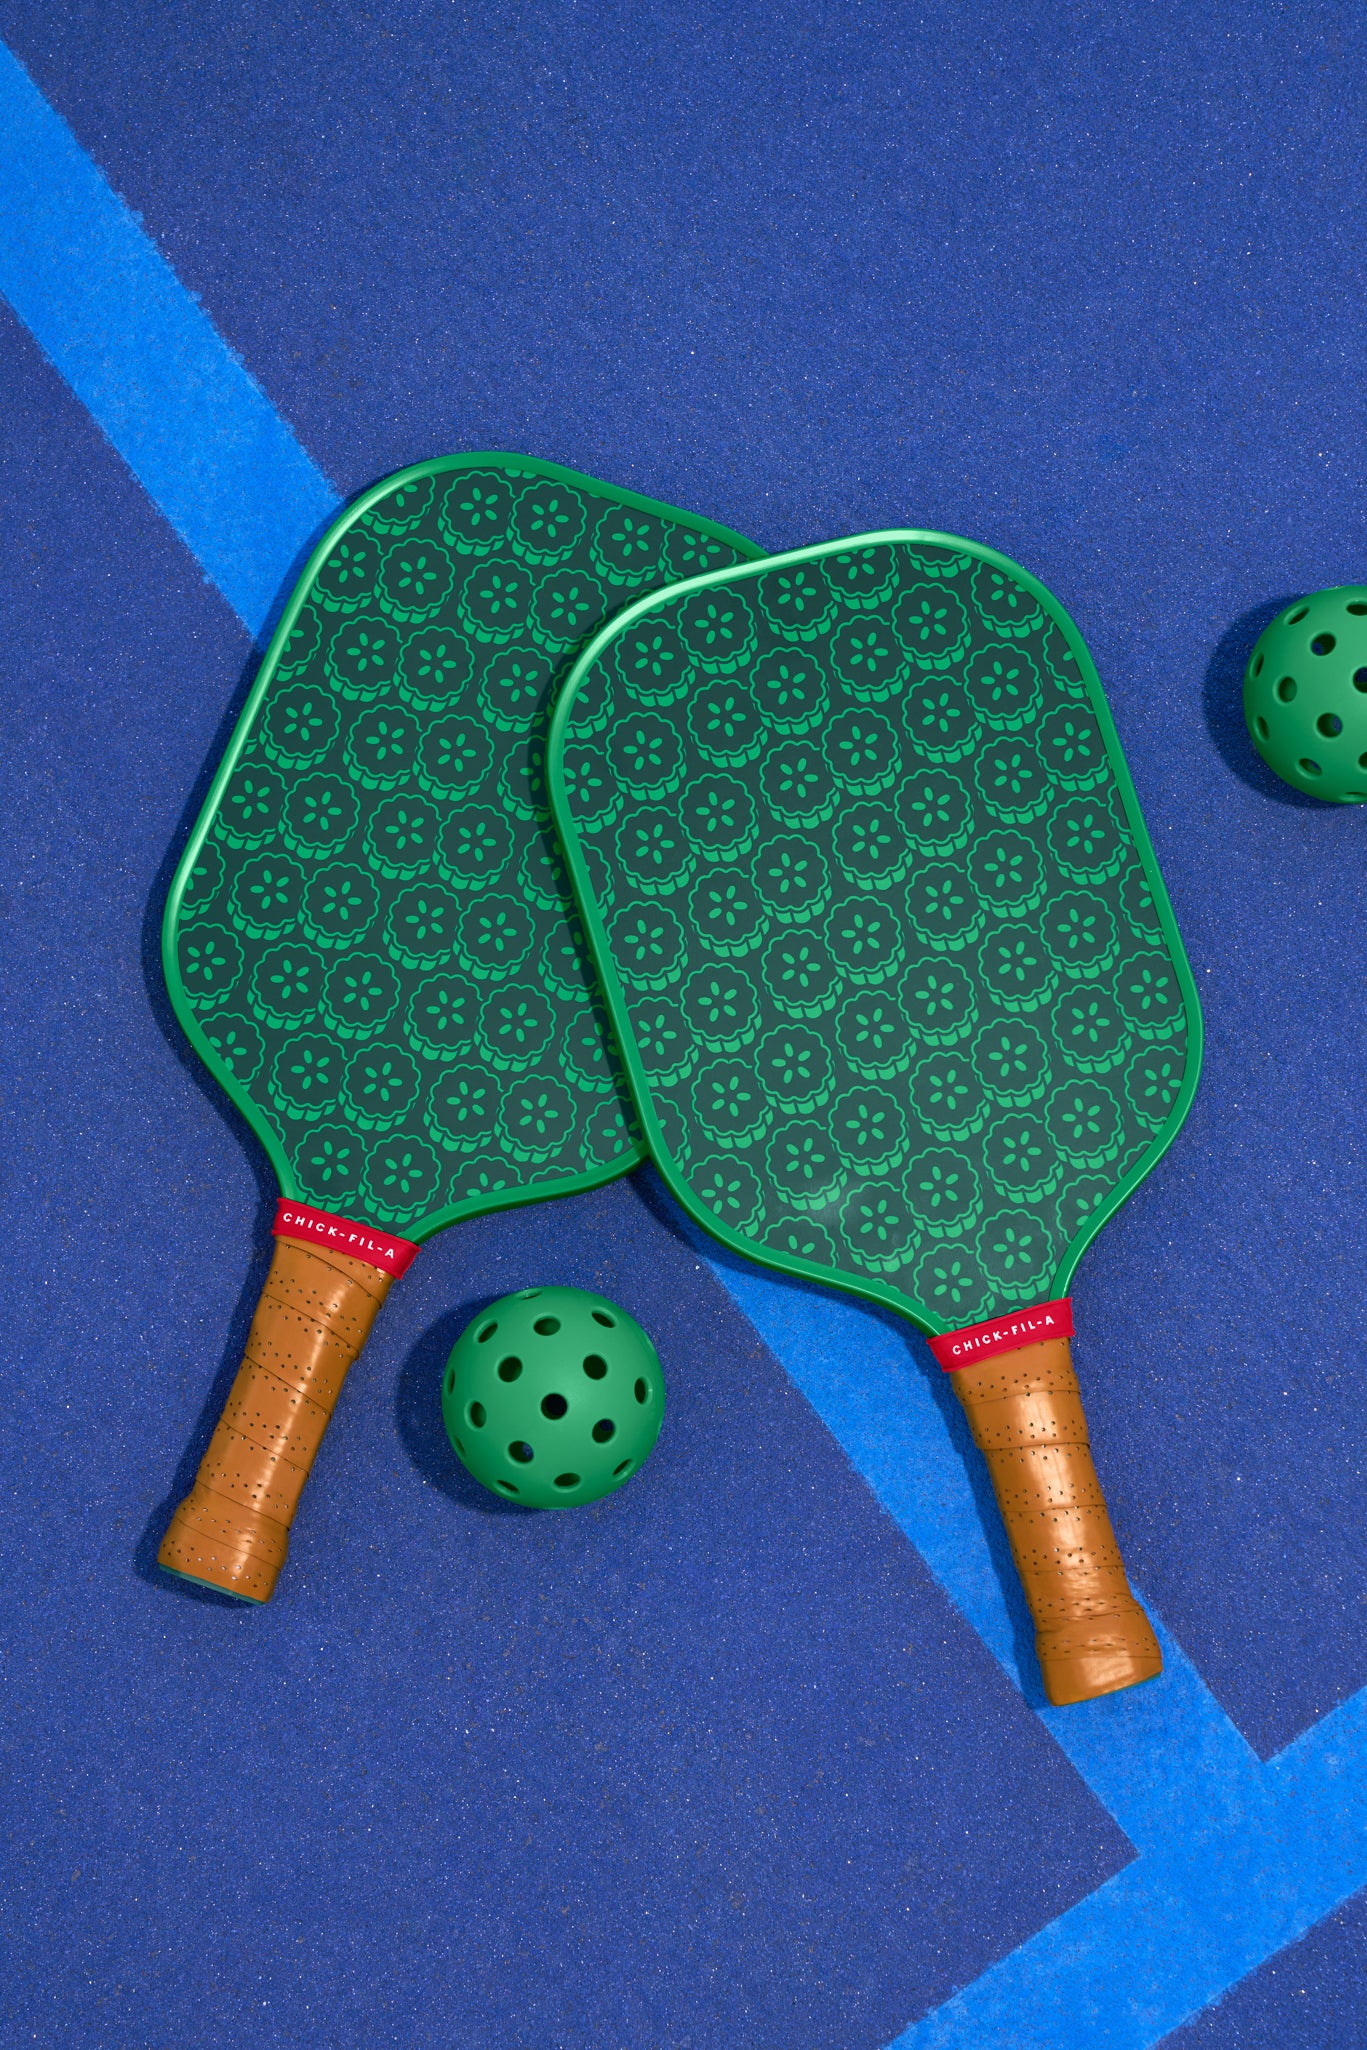 Pickle Pickle™ Pickleball Set with 2 paddles and 2 green balls on court